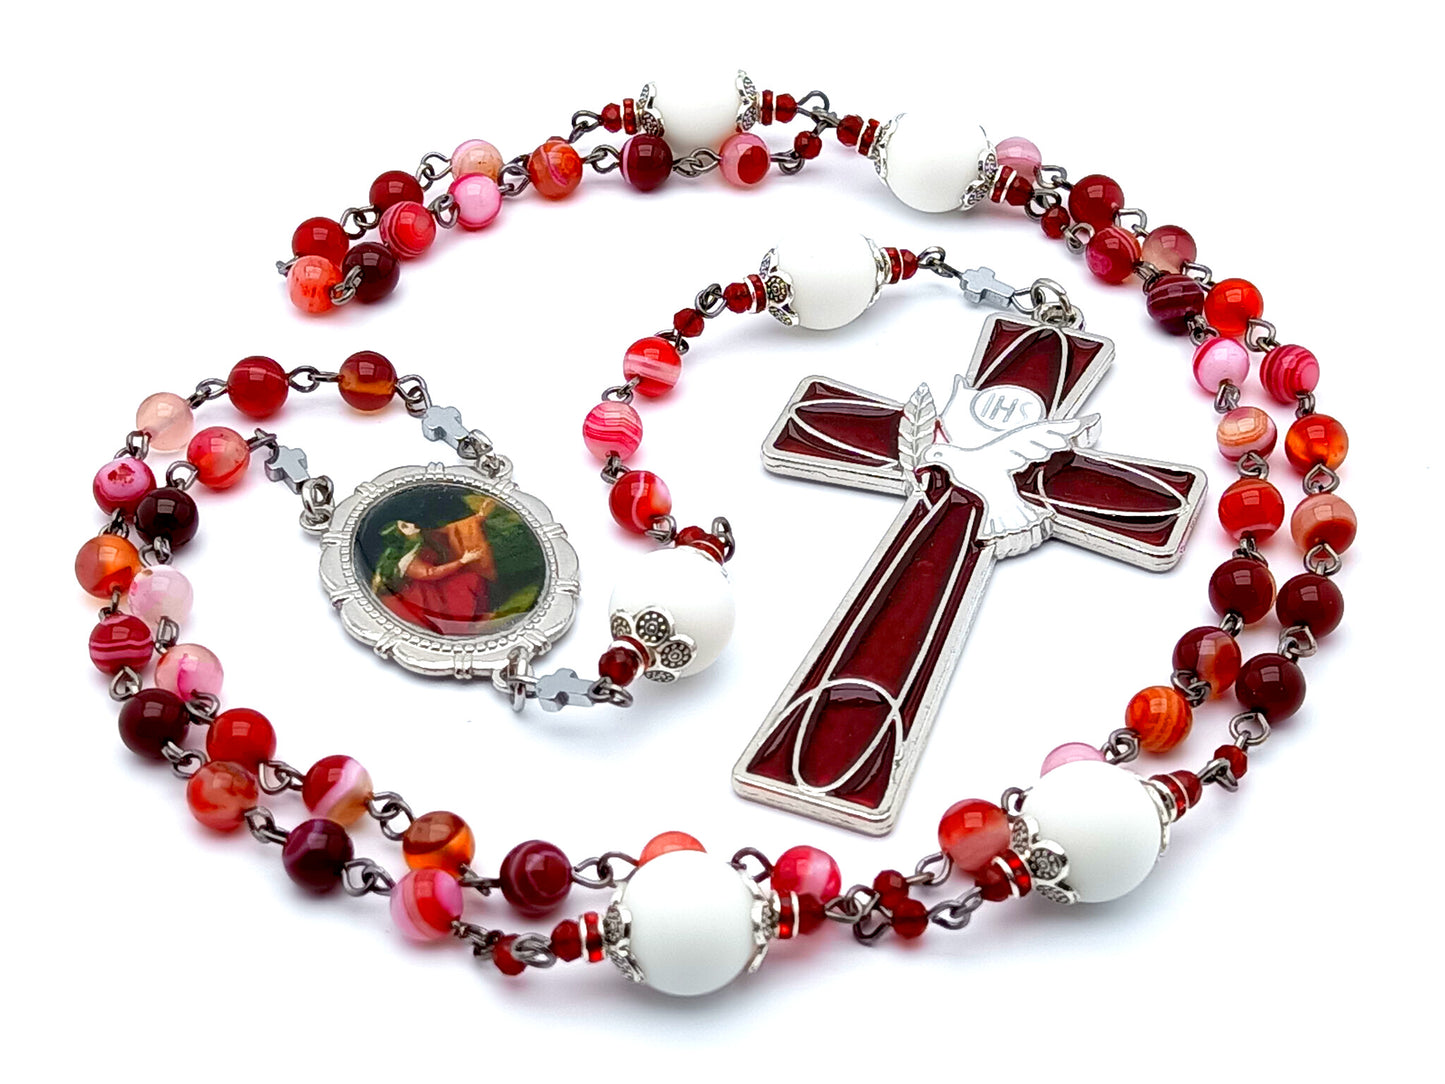 Saint Mary Magdalene unique rosary beads with red agate and alabaster gemstone beads and Holy Spirit red enamel cross.